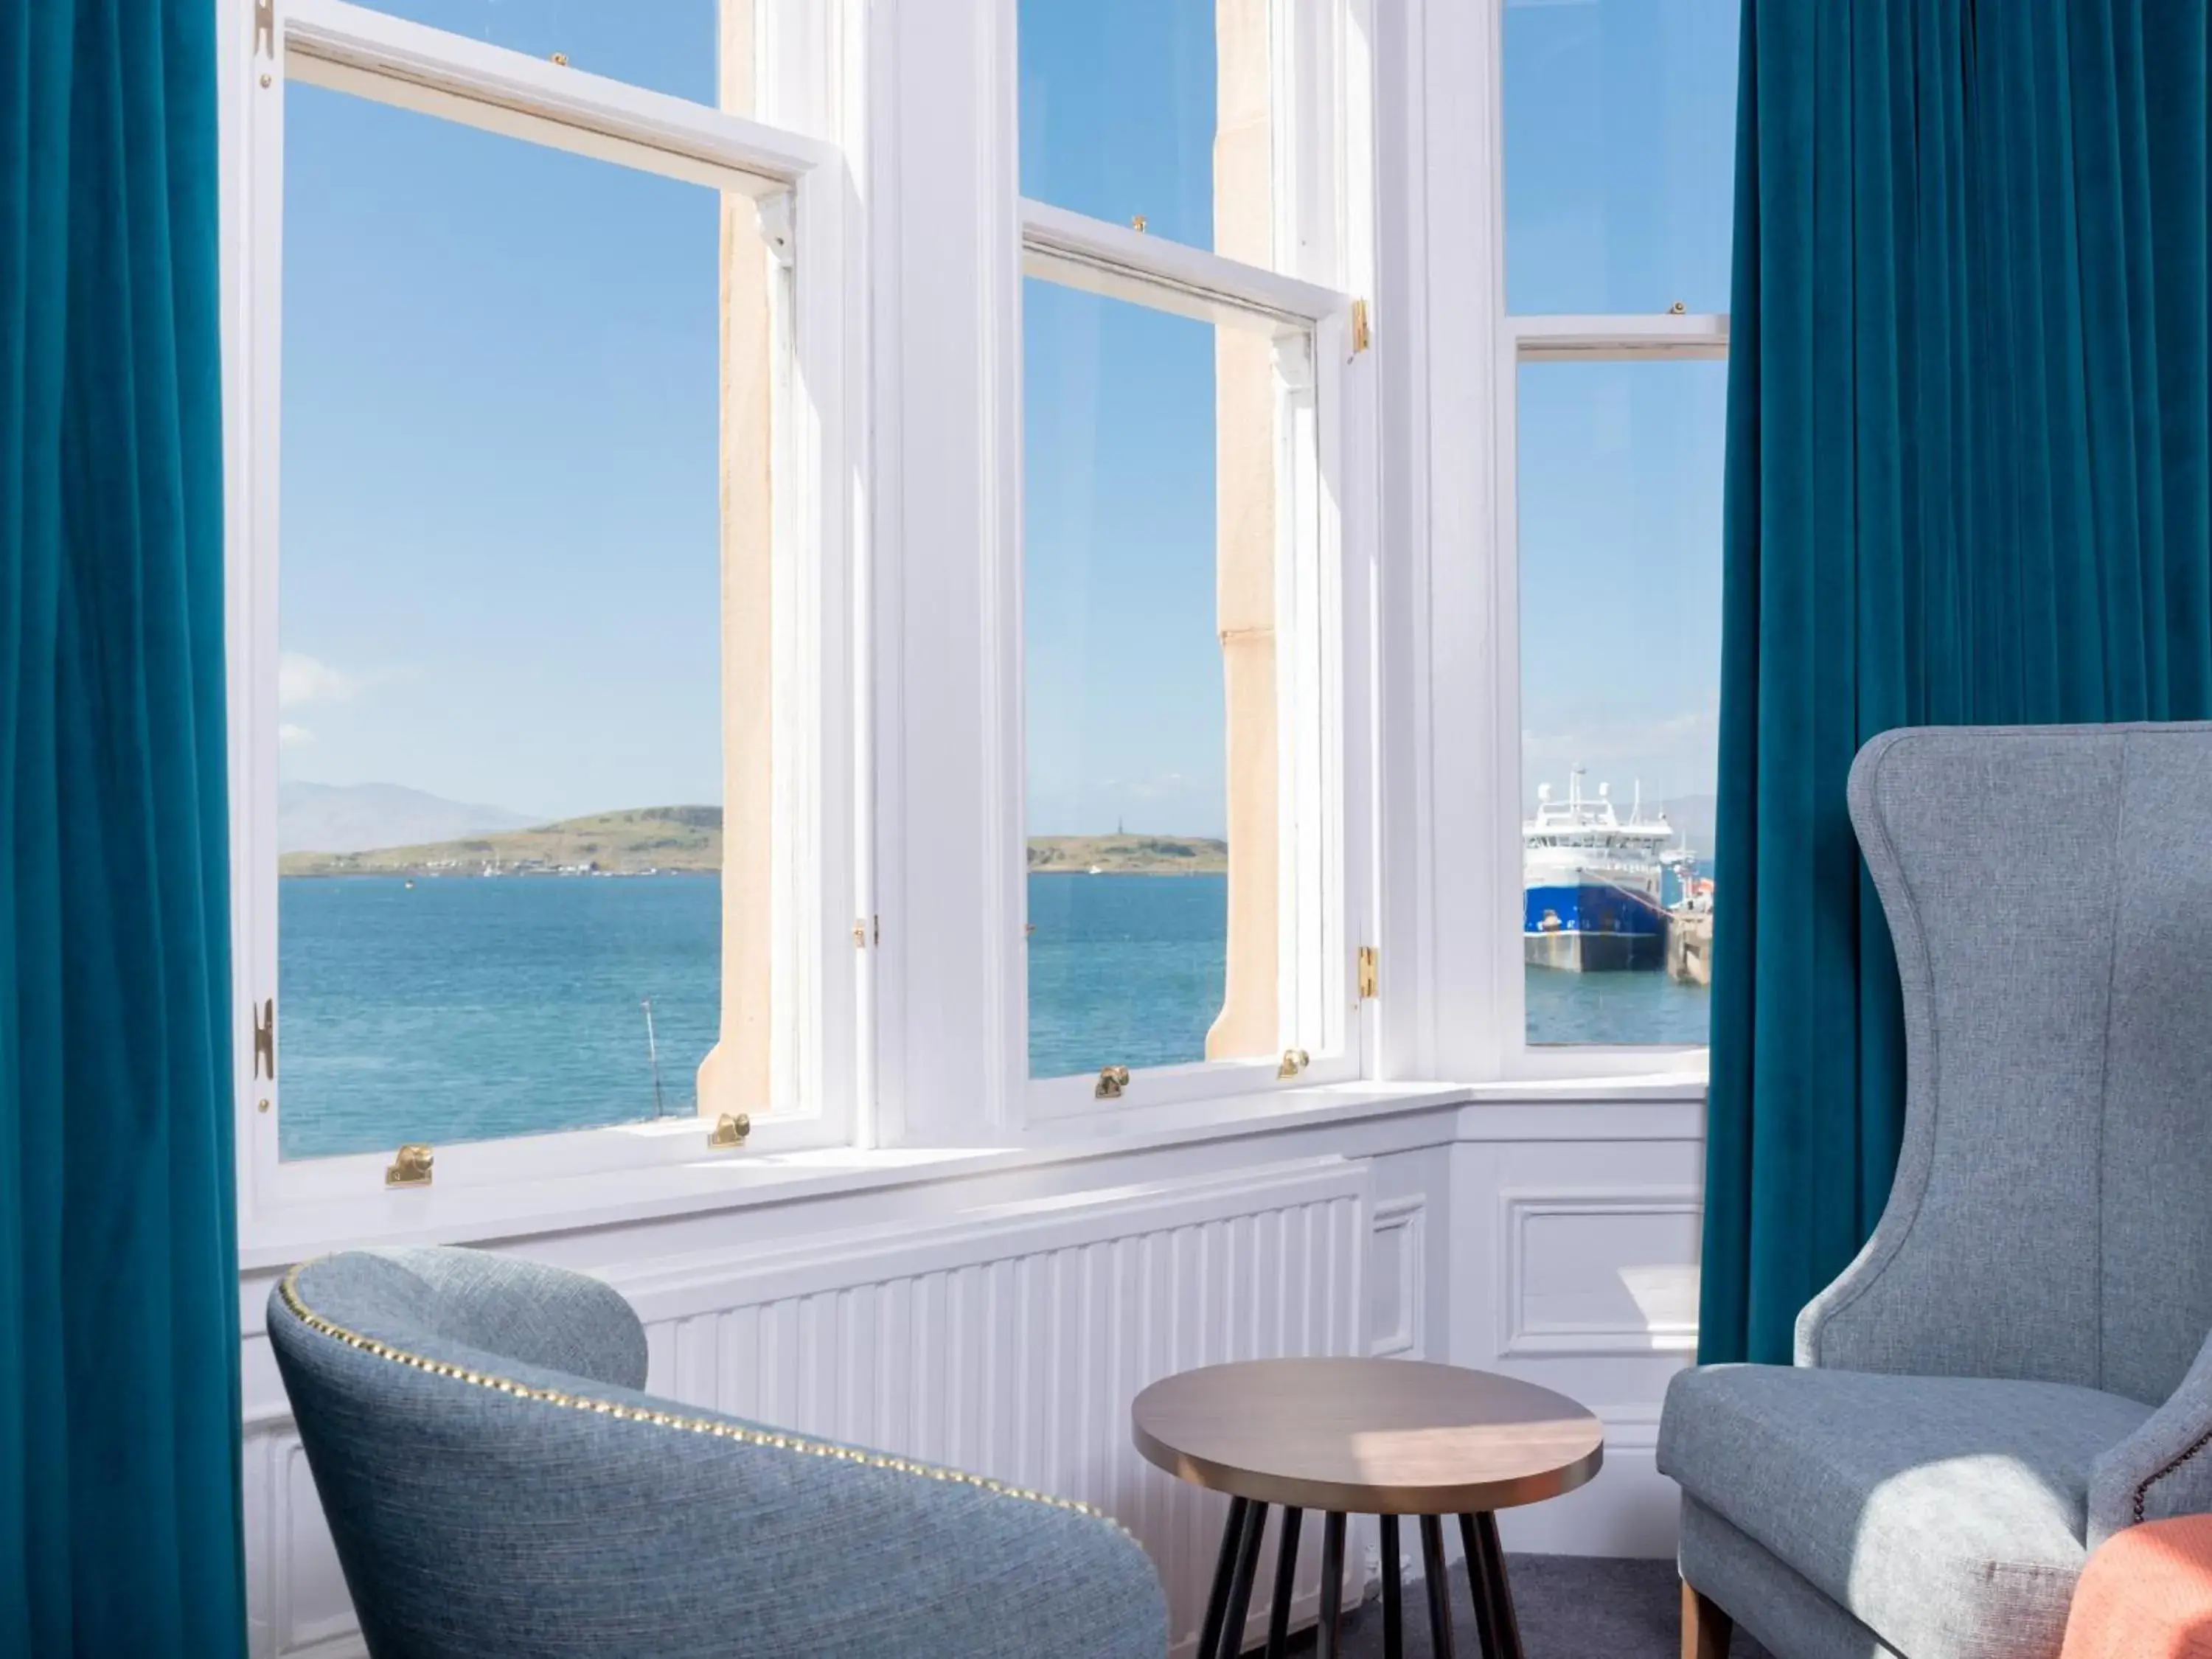 Sea view in The Perle Oban Hotel & Spa